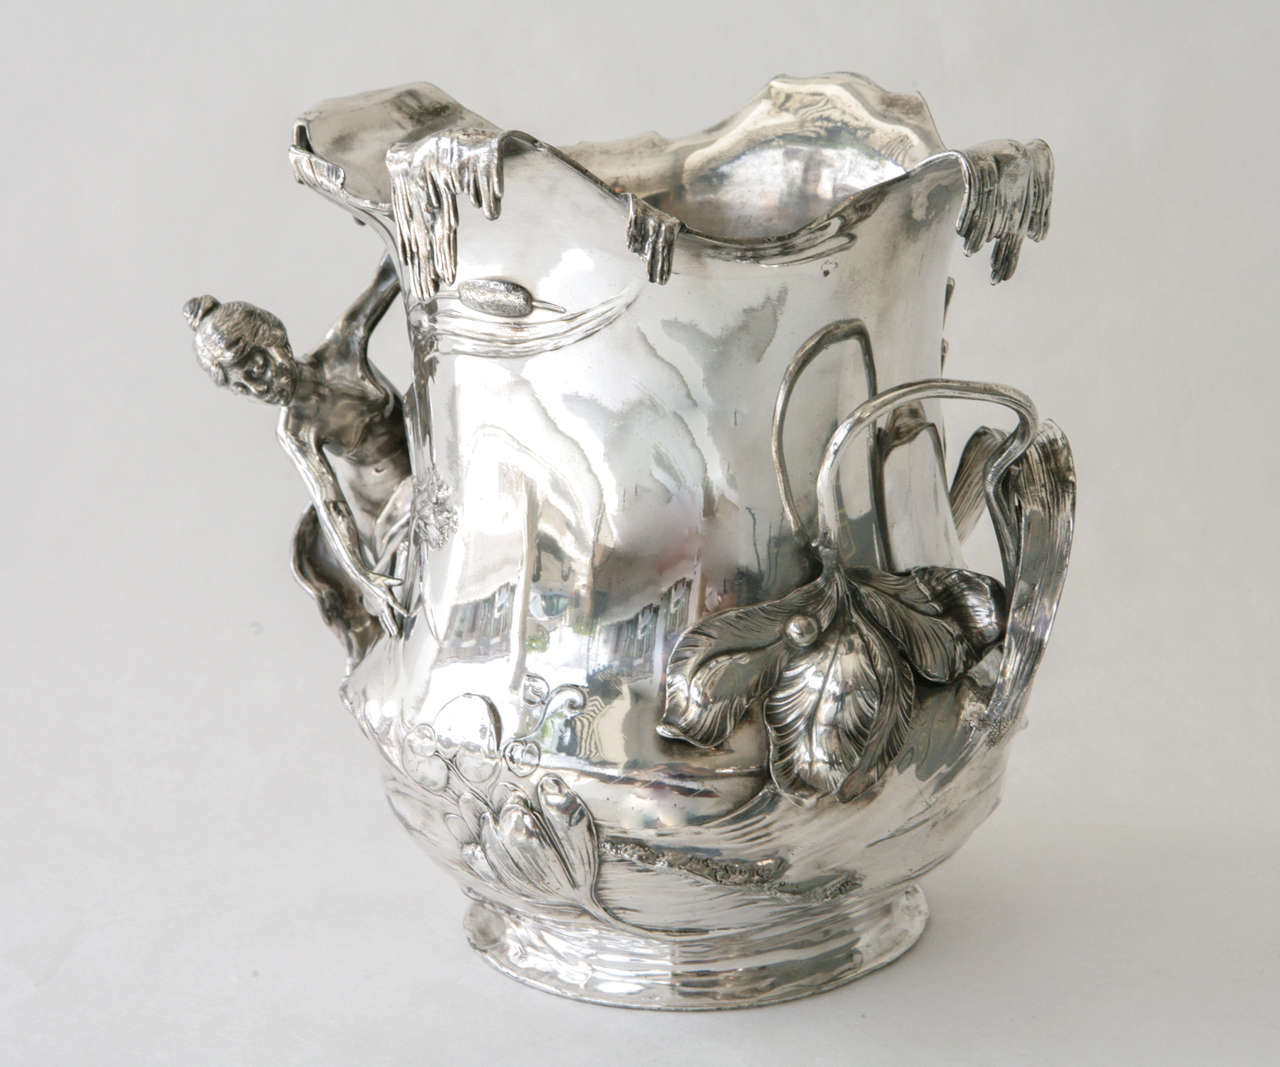 A beautiful Art Nouveau silver plate wine or champagne bucket by Viennese metalwork production company AK & Cie (Albert Köhler u. Cie) that later became part of WMF. The piece is detailed with a nymph peering around one side, waves of water, a